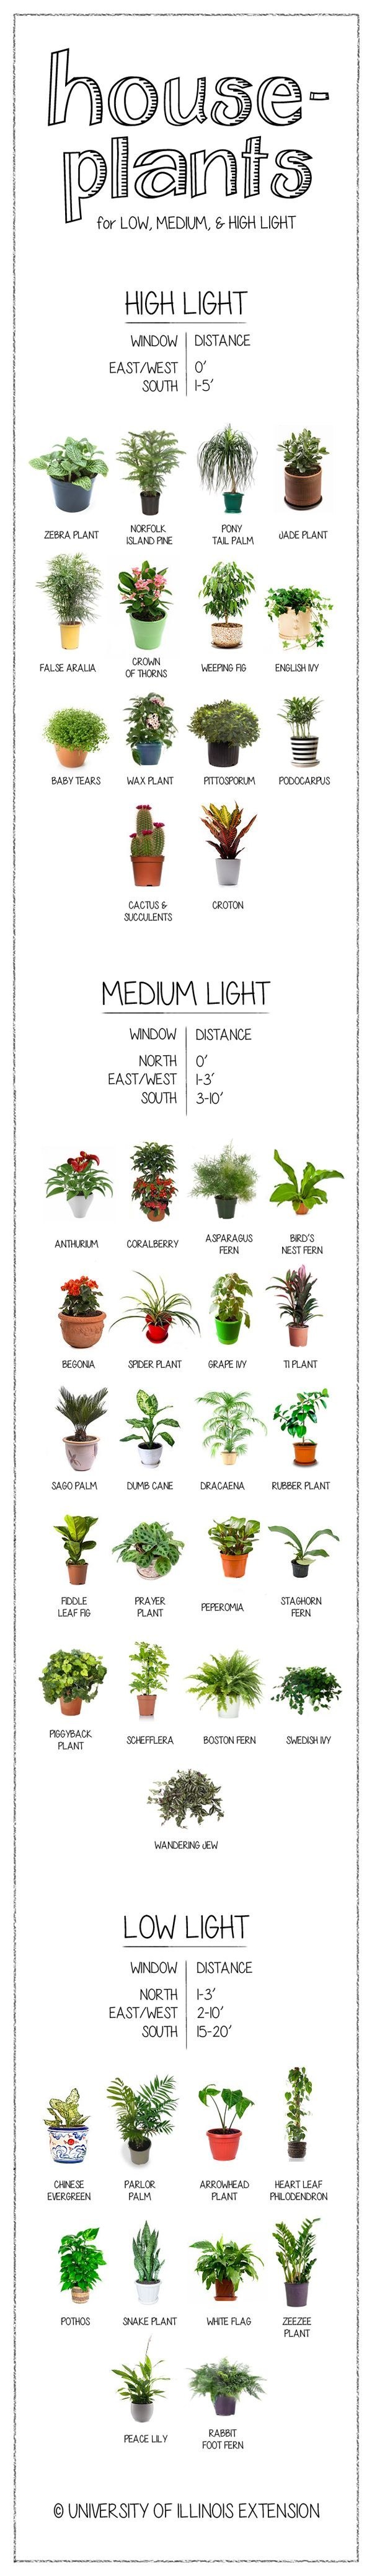 How much light does your houseplant need? Find out on this handy chart.